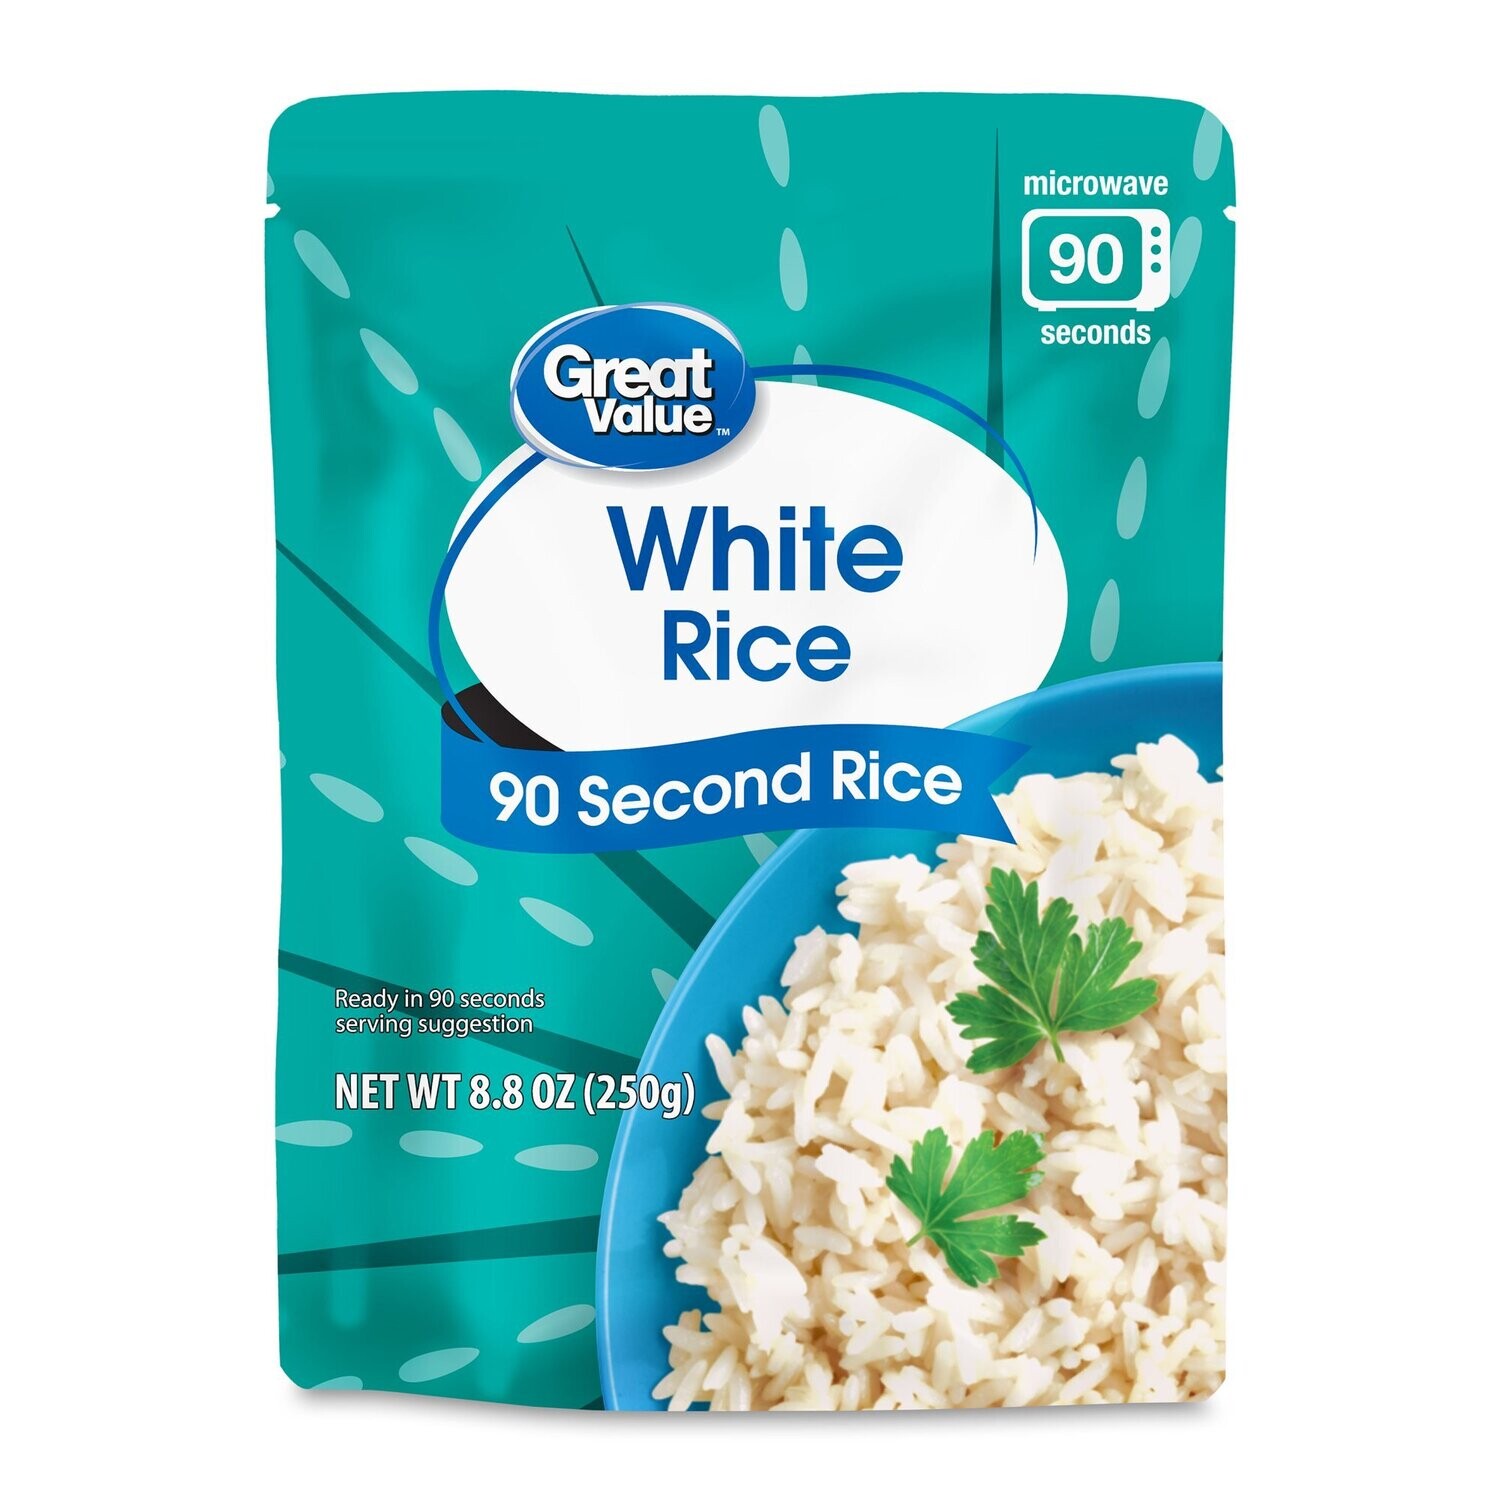 Great Value Rice Microwavable Pouch - White